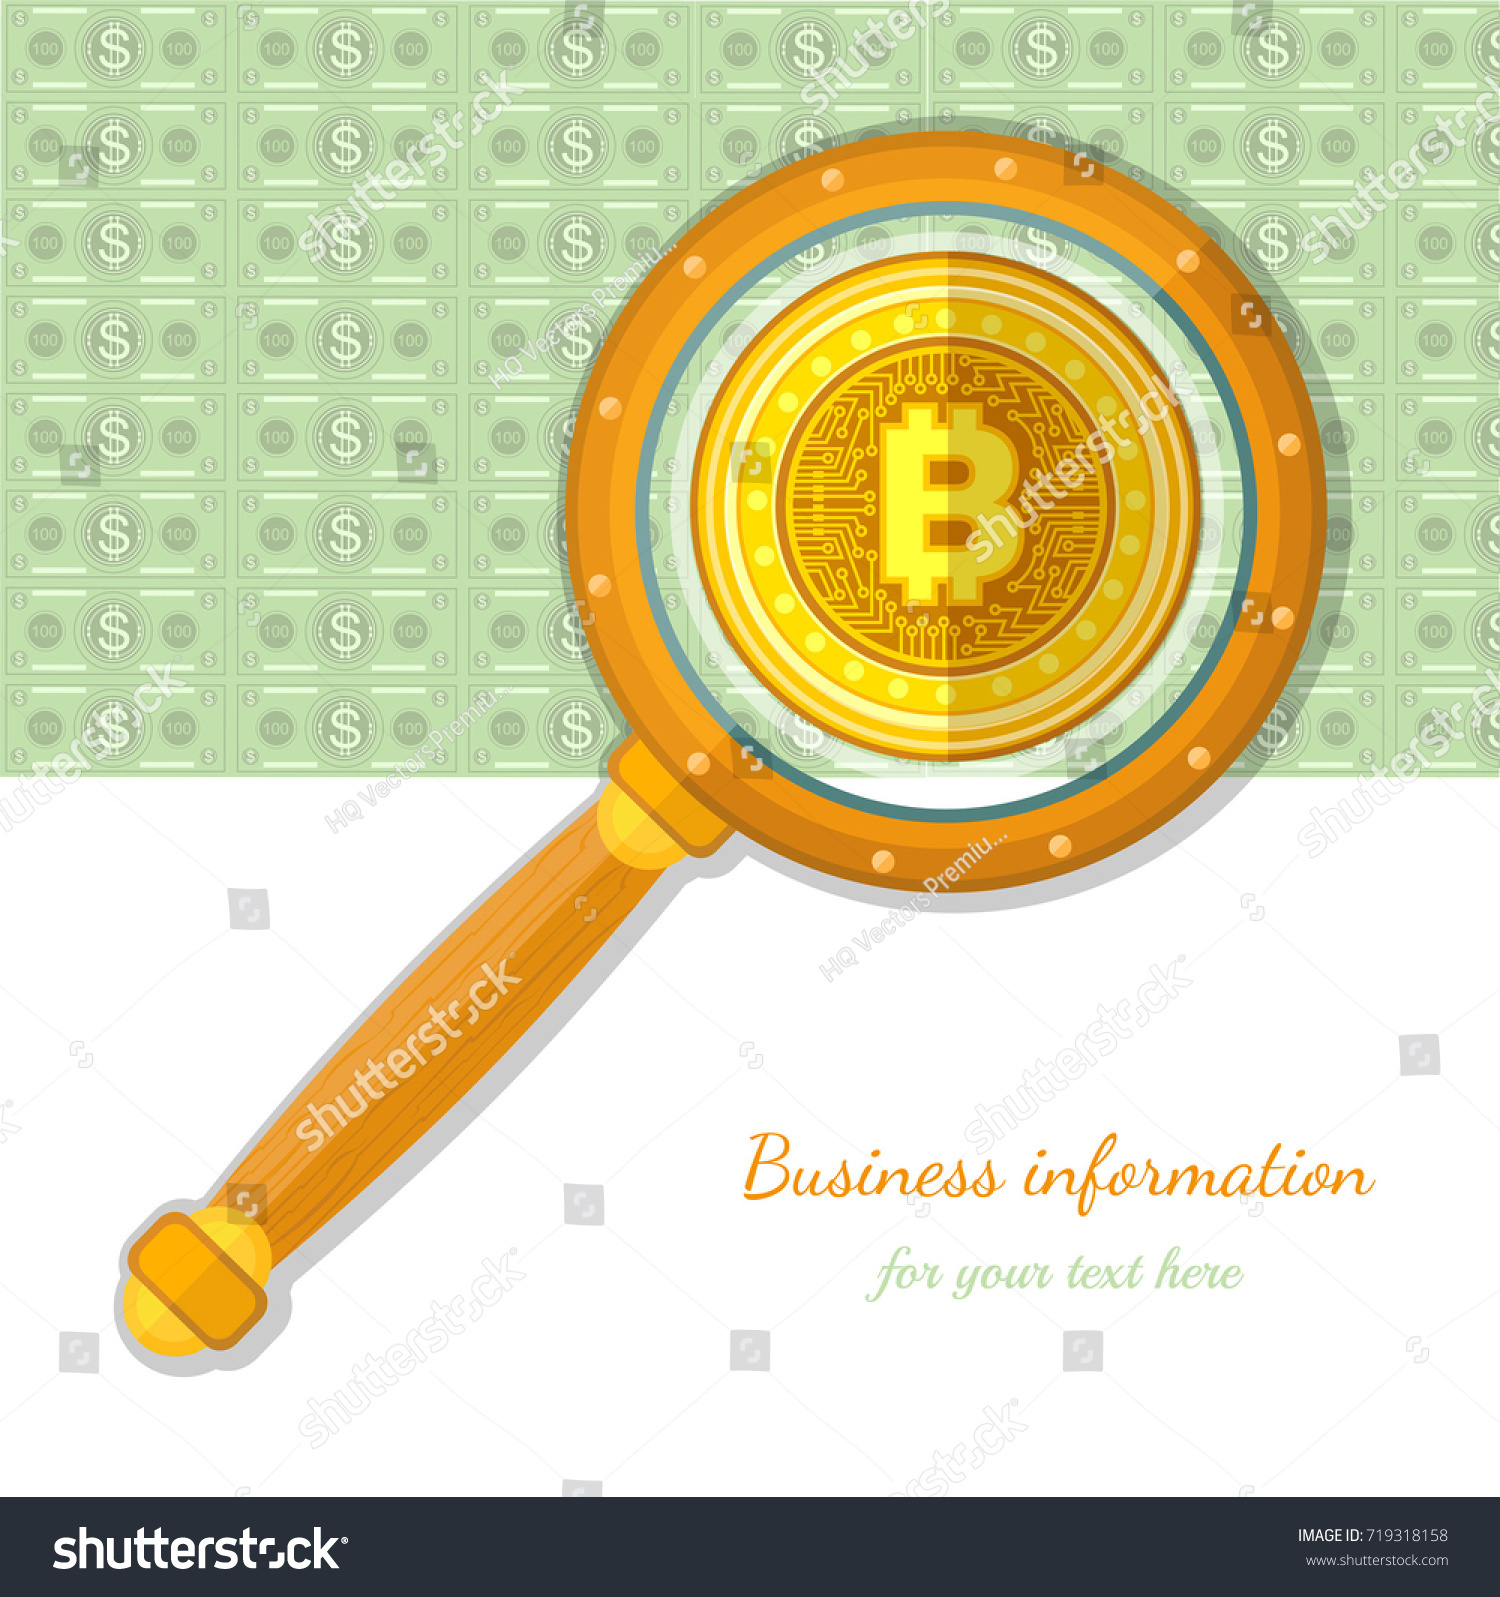 SVG of Magnifier on bank notes background visualization of bit coin. Flat business background svg